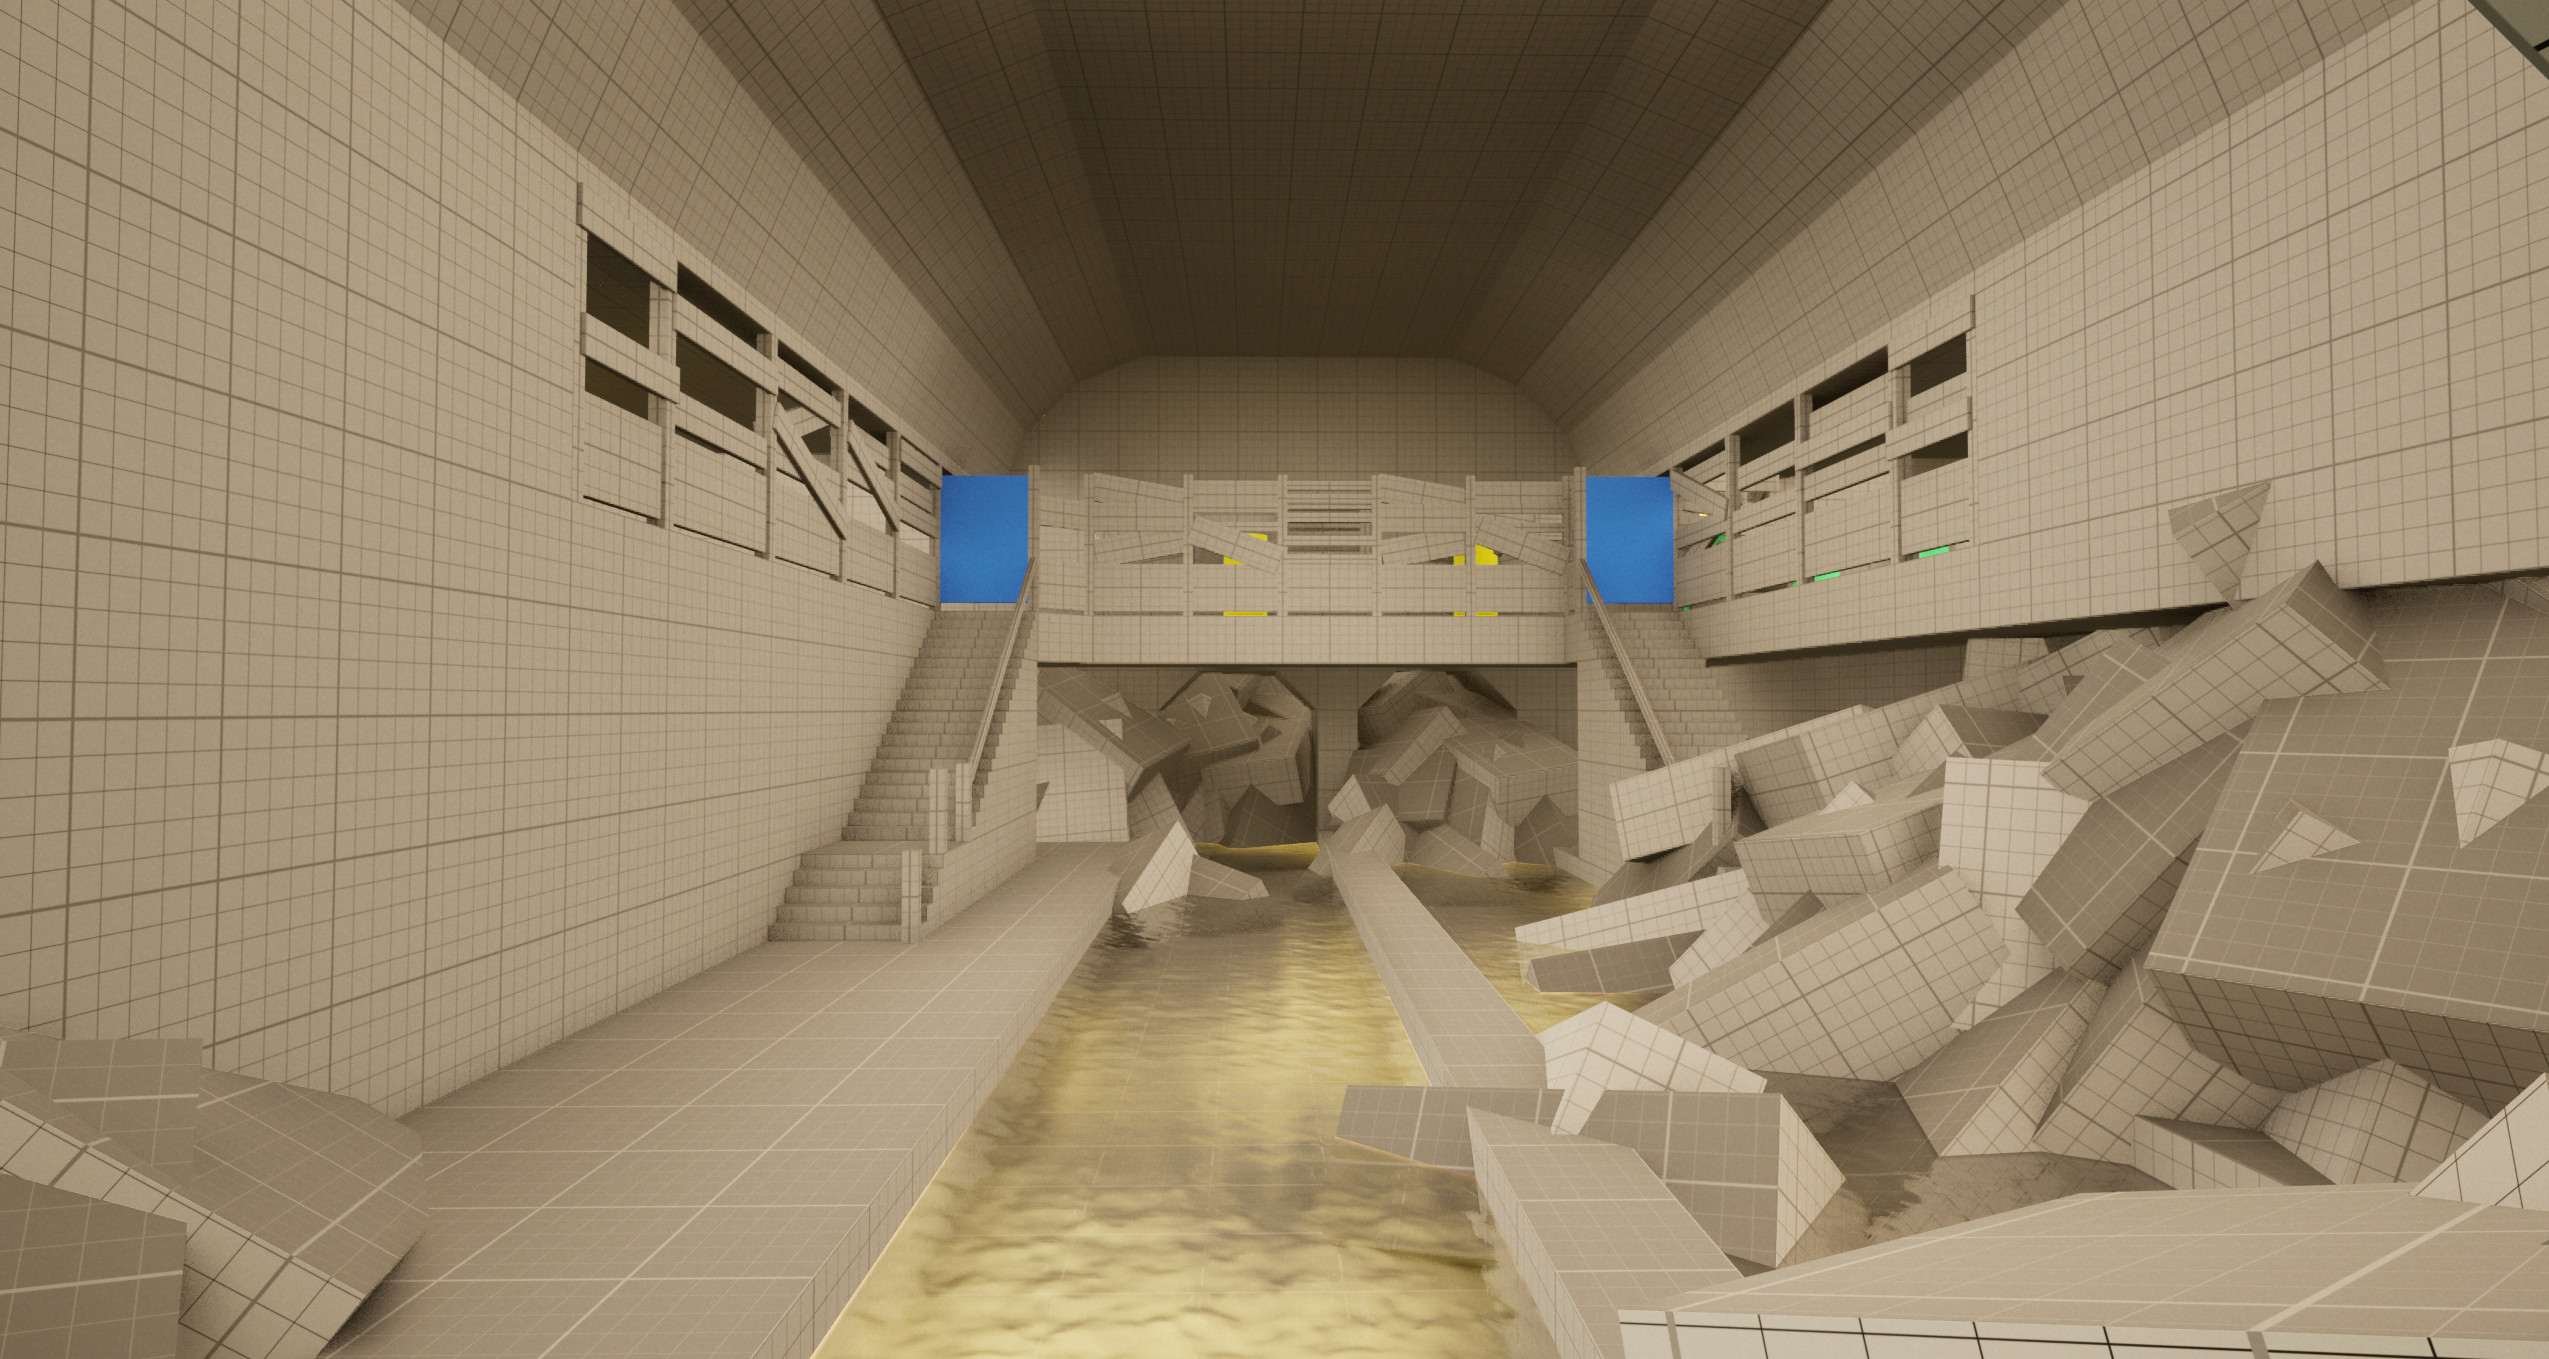 The subway tunnel where the player begins. This is the view the player gets as the level begins.